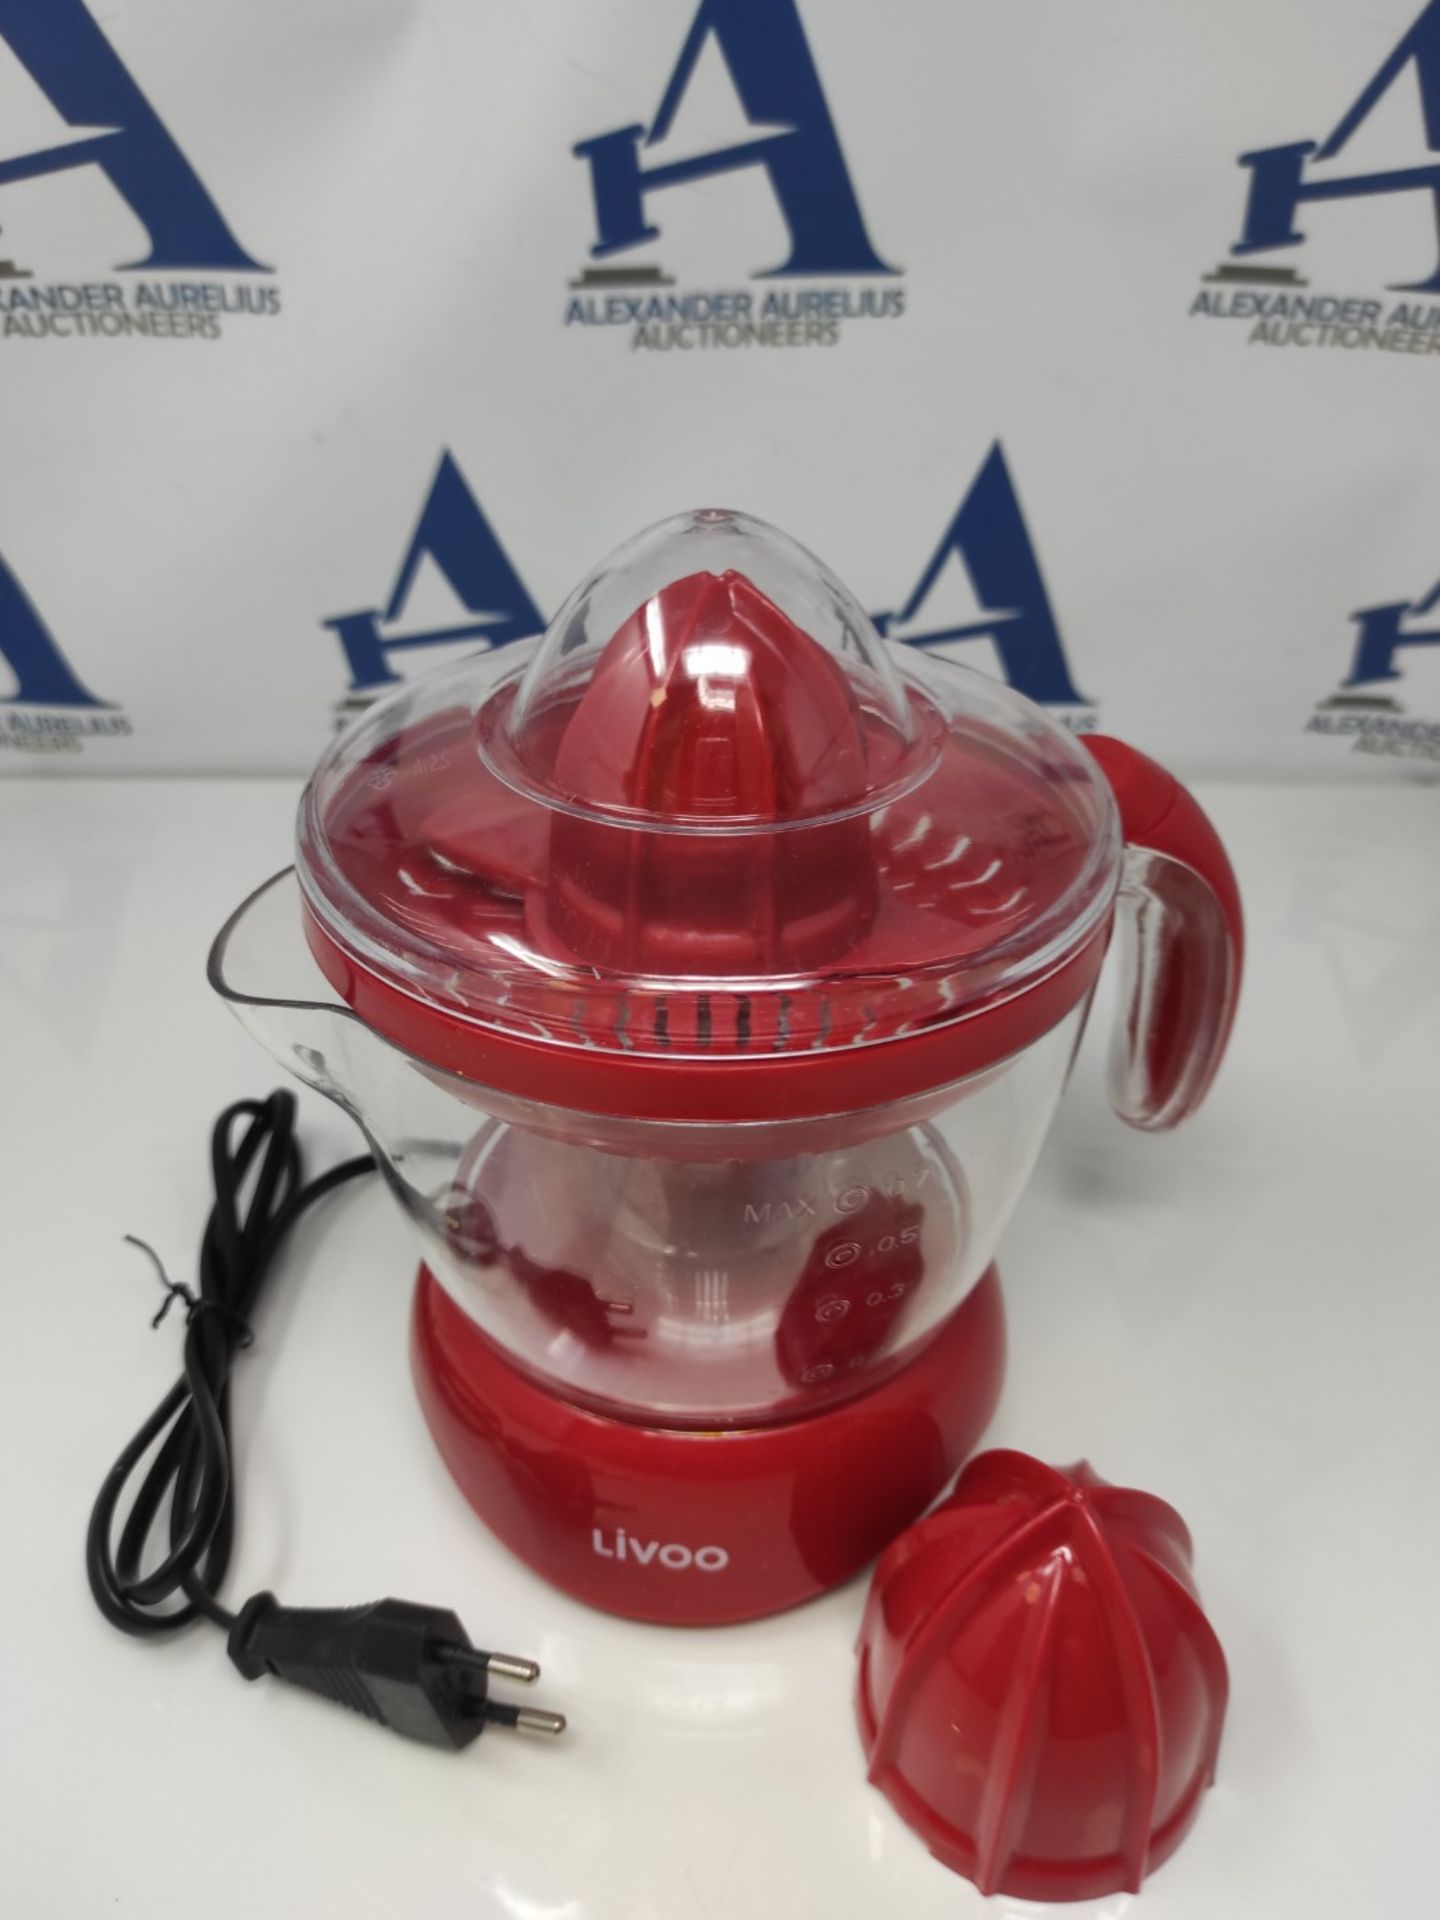 Livoo DOD131RC Electric juicer, Plastic, Red - Image 3 of 3